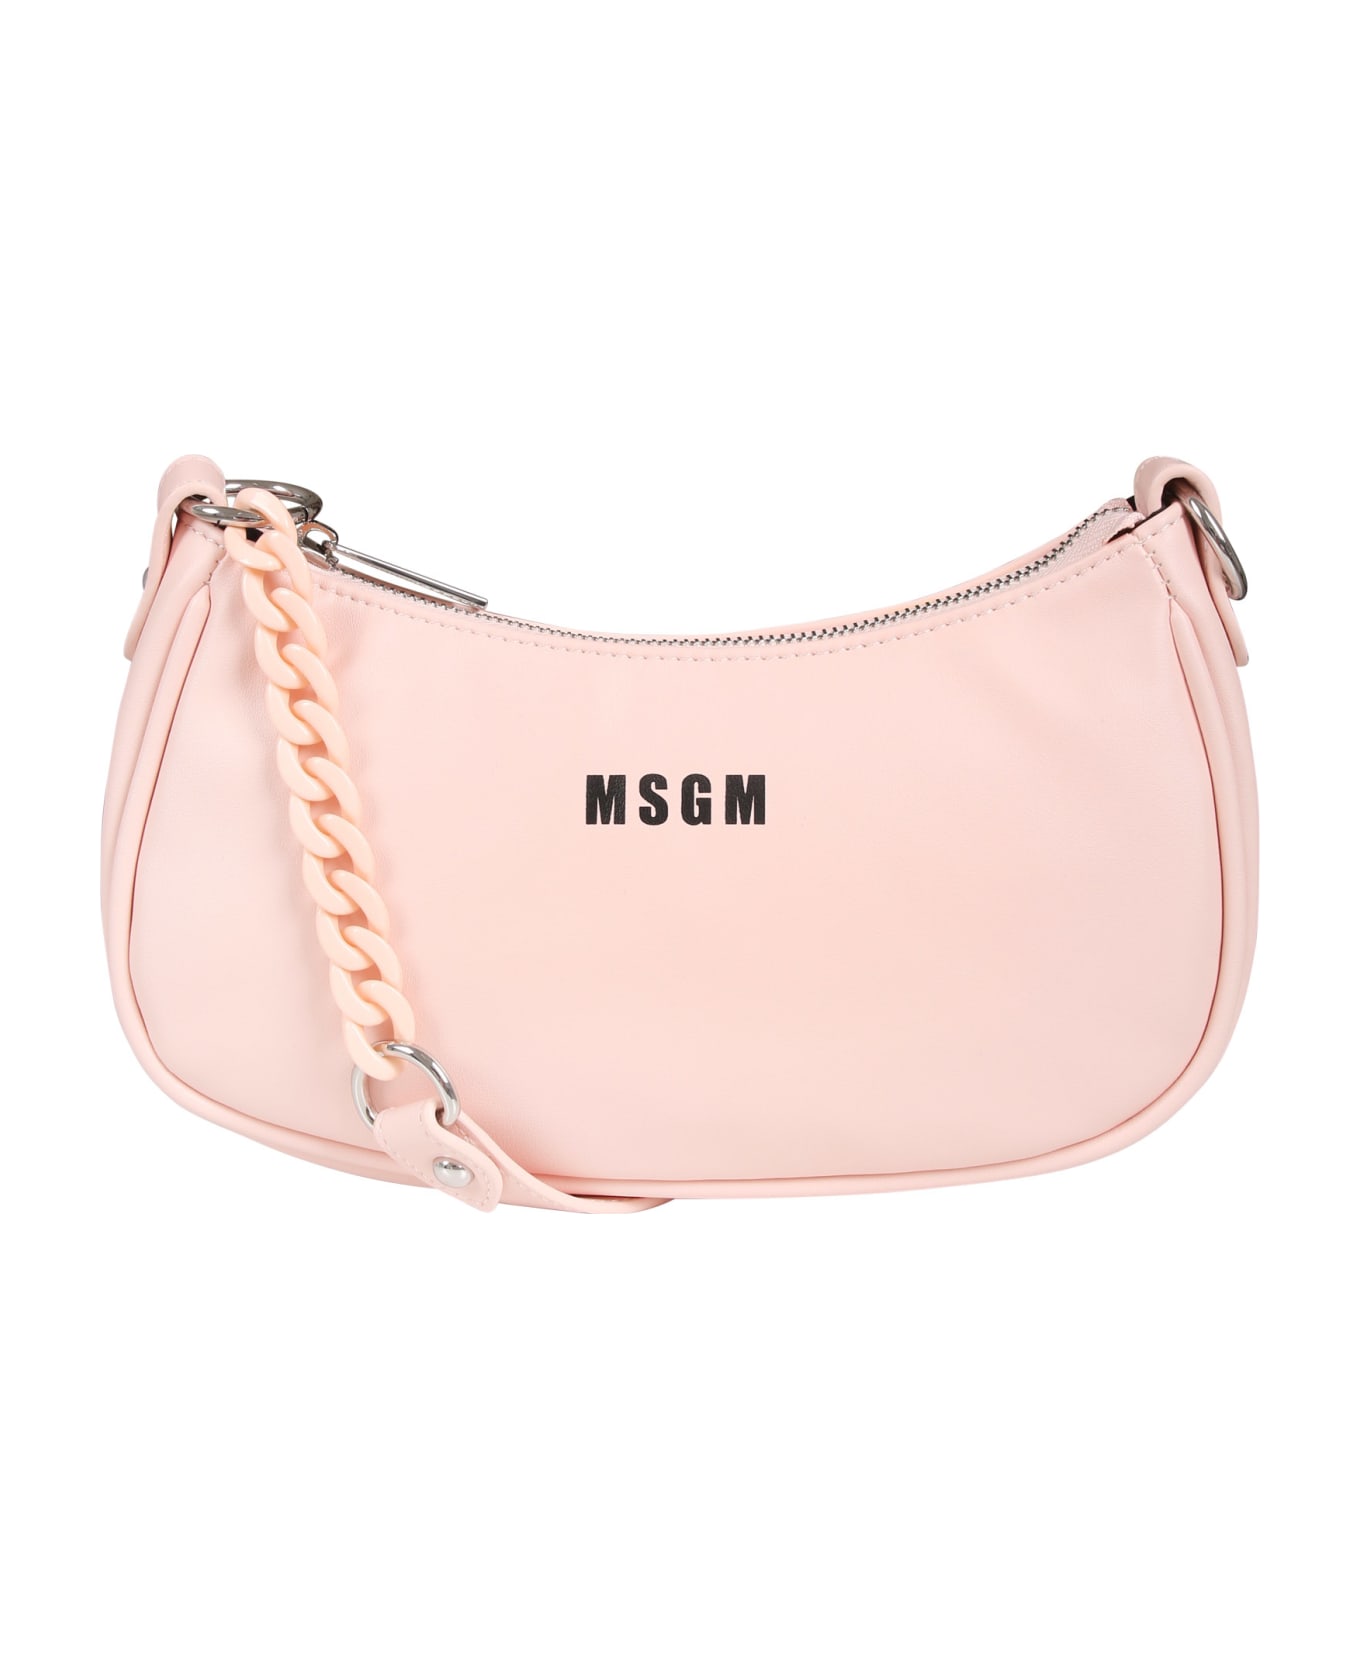 MSGM Pink Bag For Girl With Logo - Pink アクセサリー＆ギフト